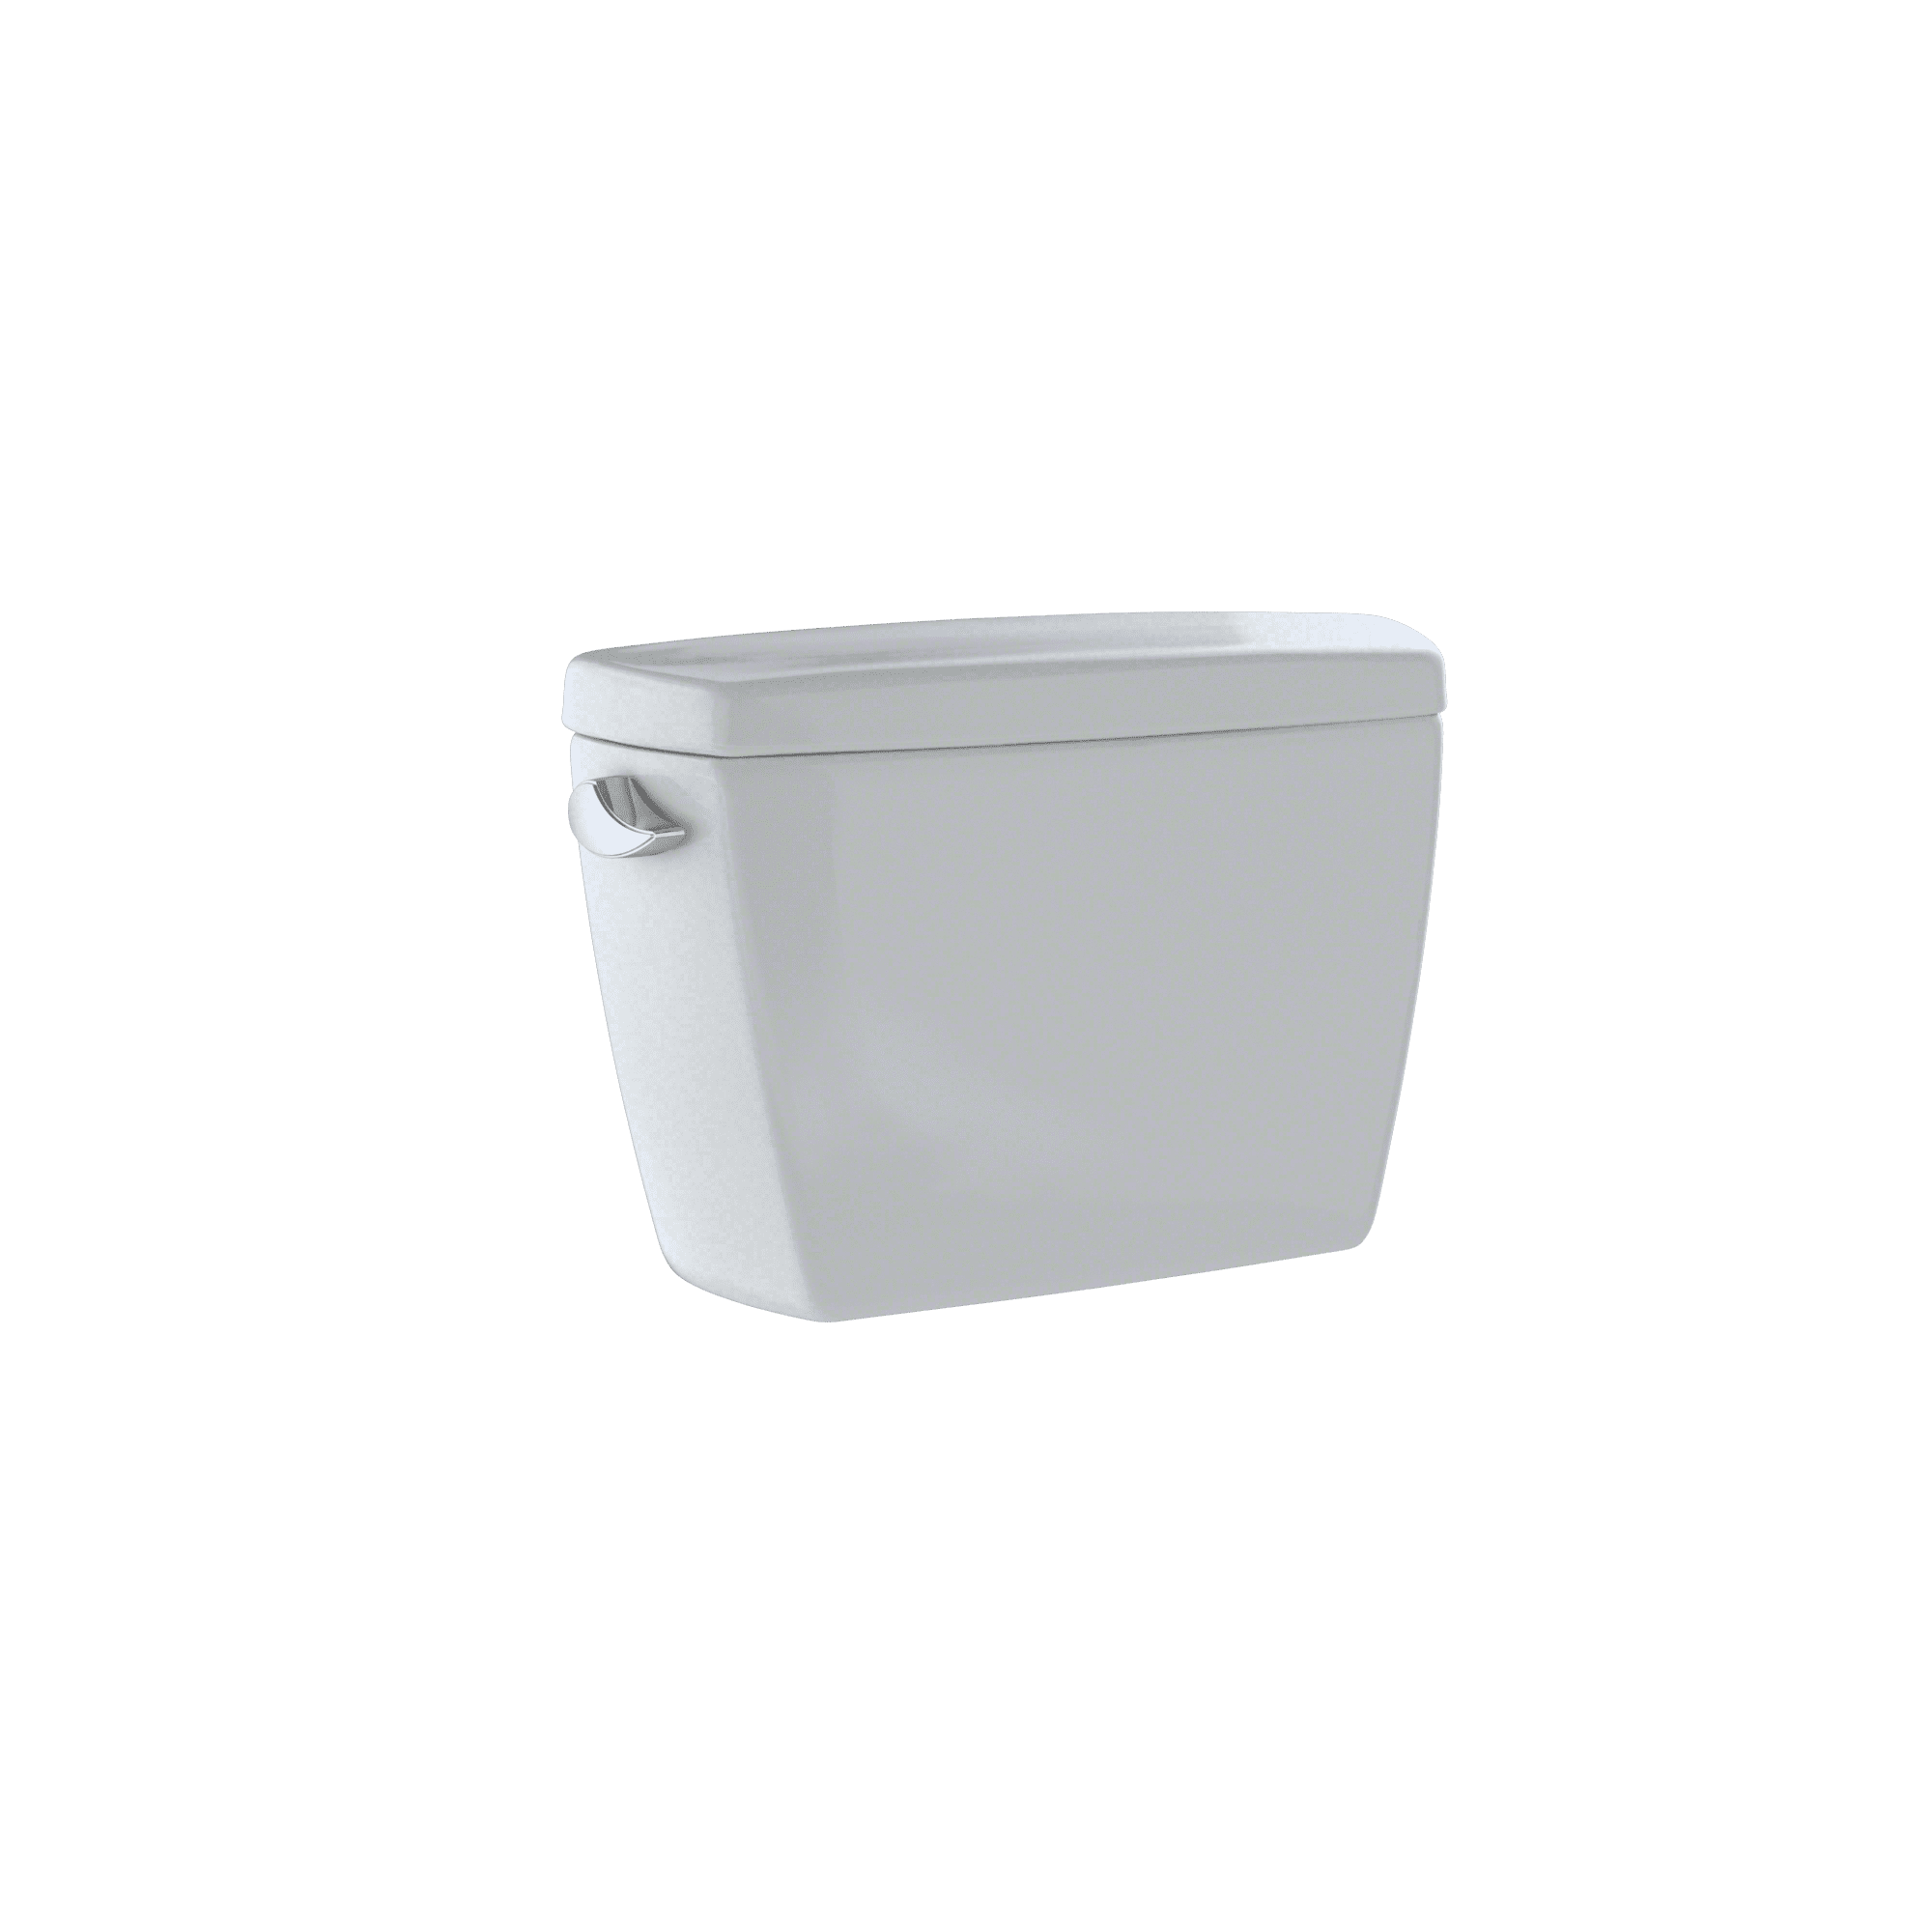 TOTO St743s Toilet Tank From The Drake Collection for sale online 